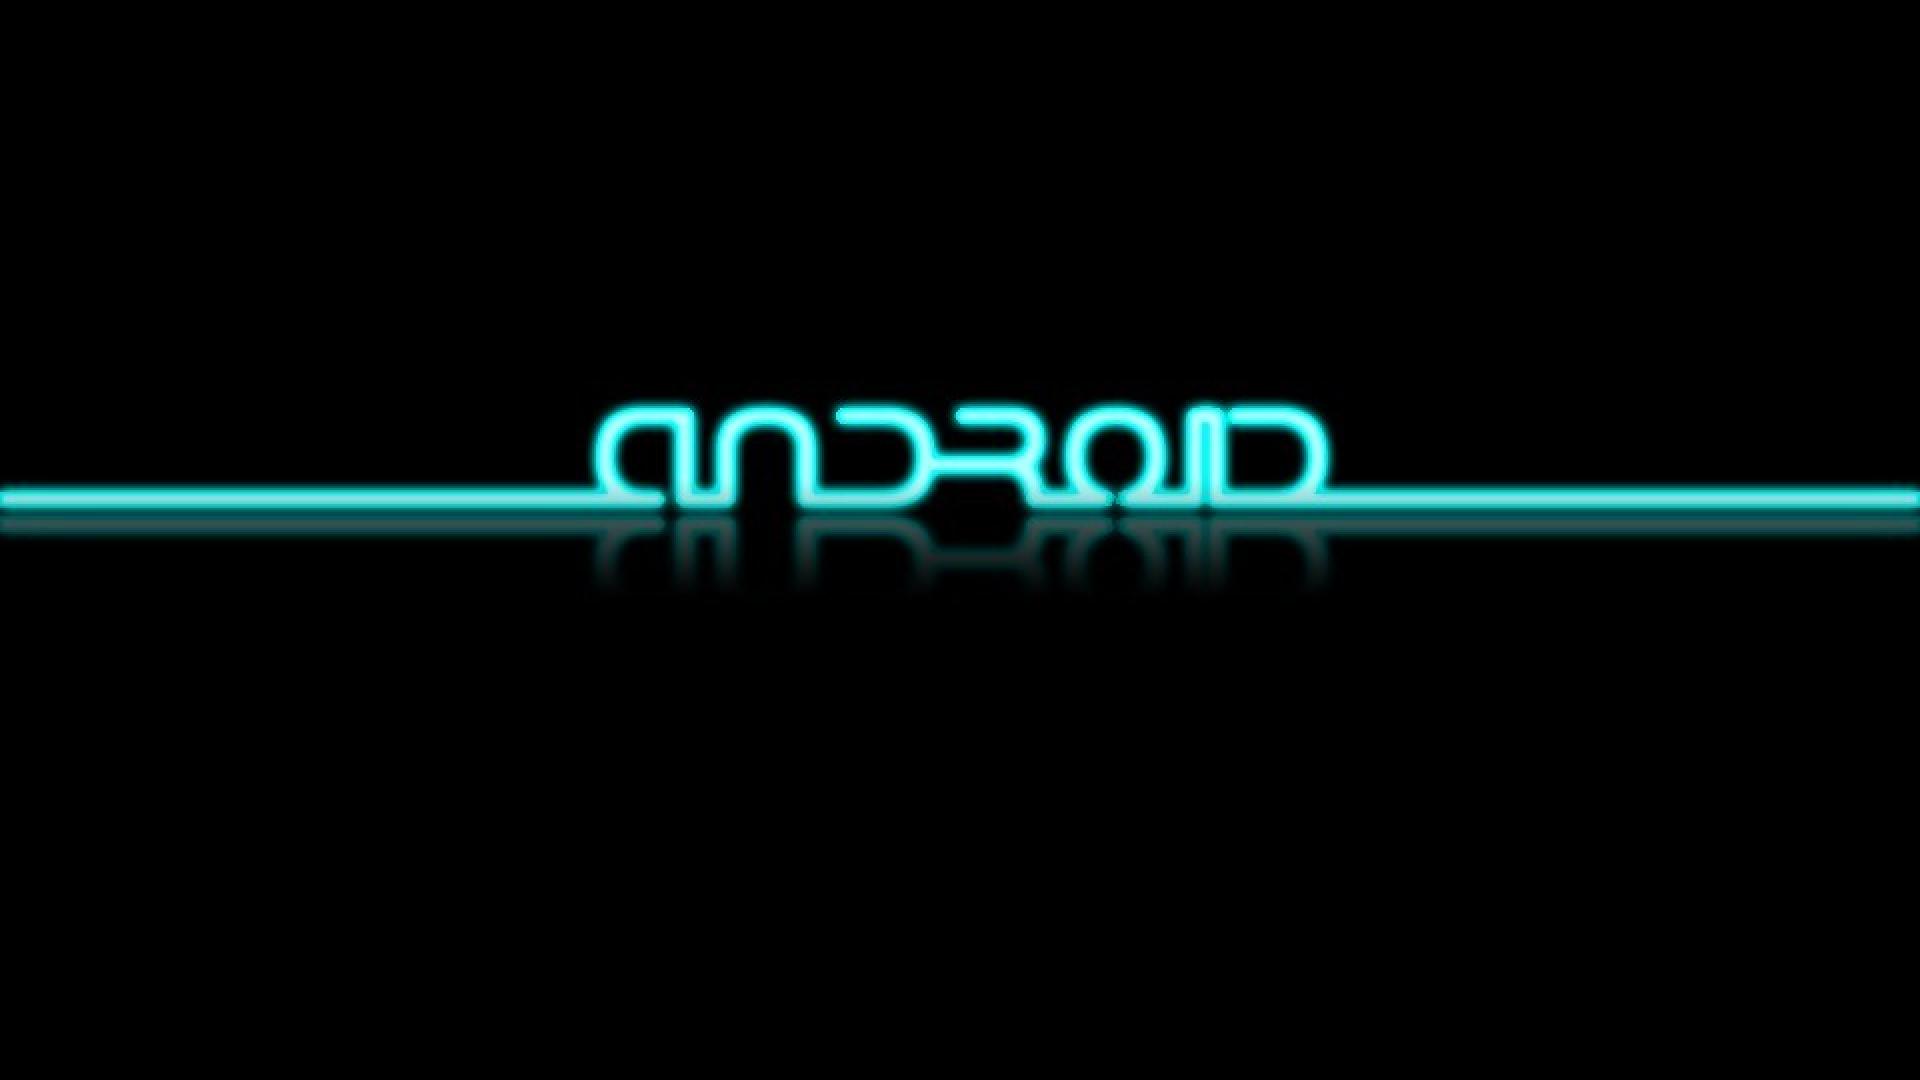 Wallpaper Hd Android Neon